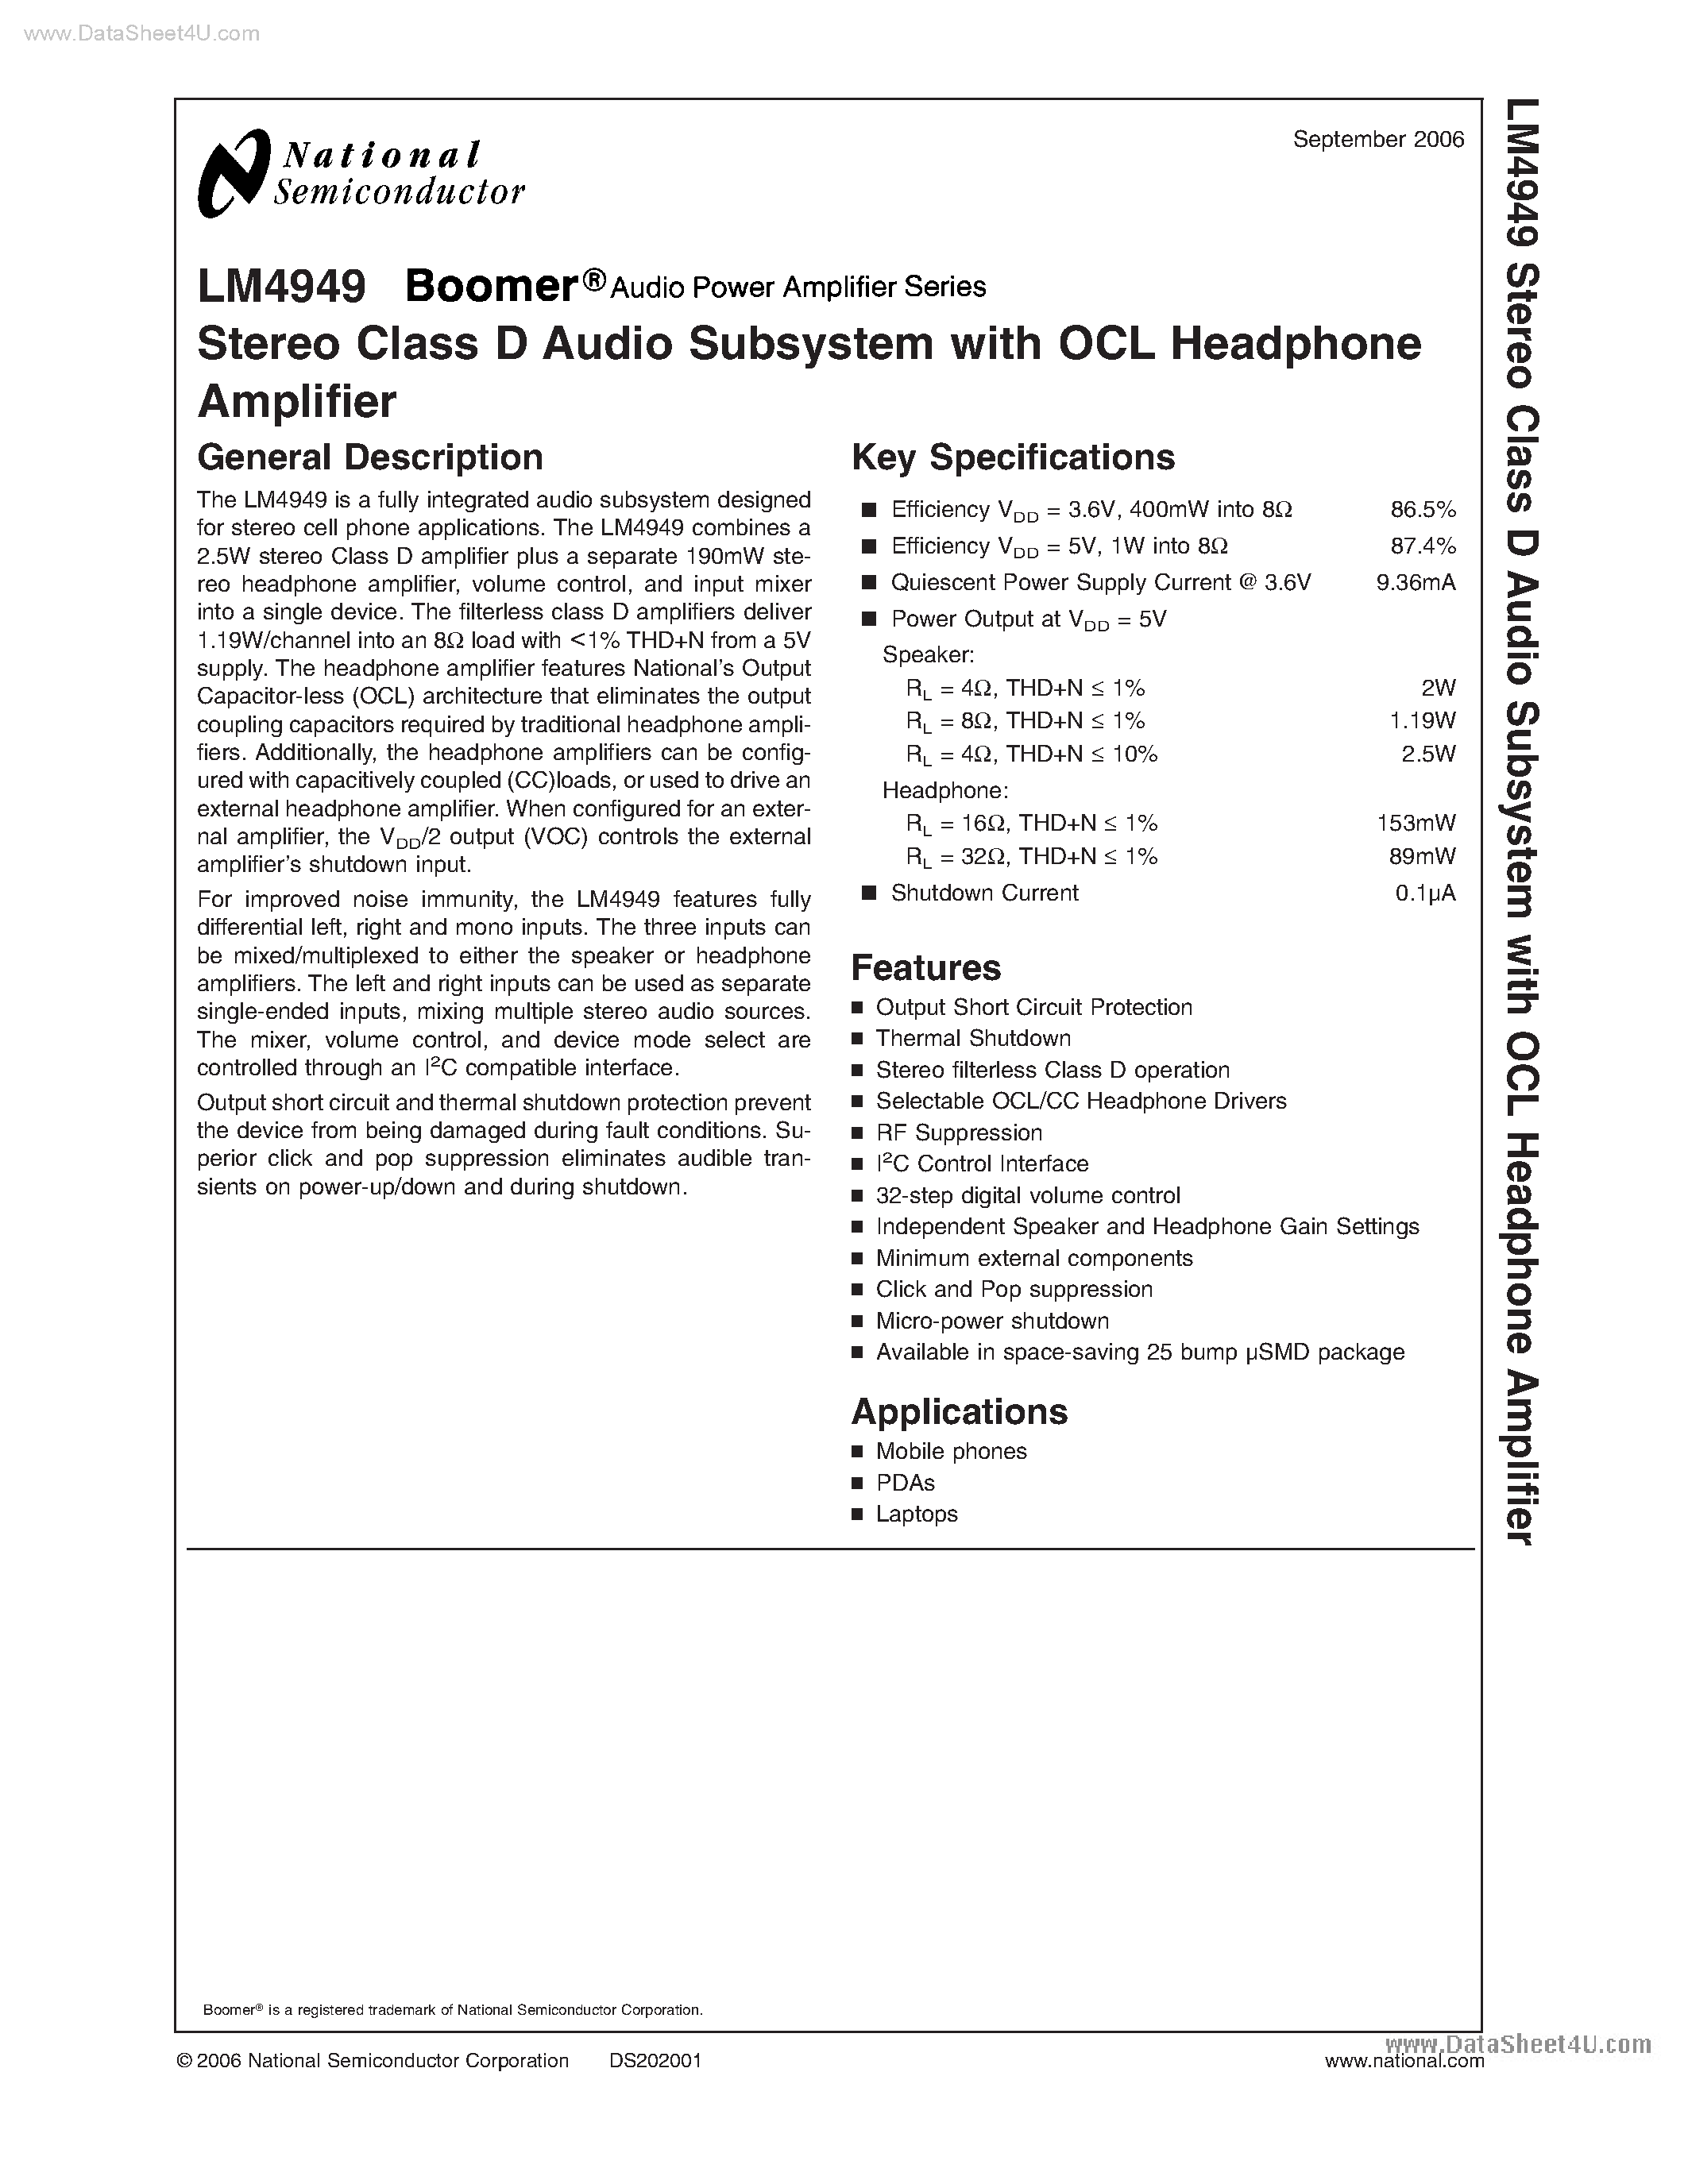 Даташит LM4949 - Stereo Class D Audio Subsystem страница 1